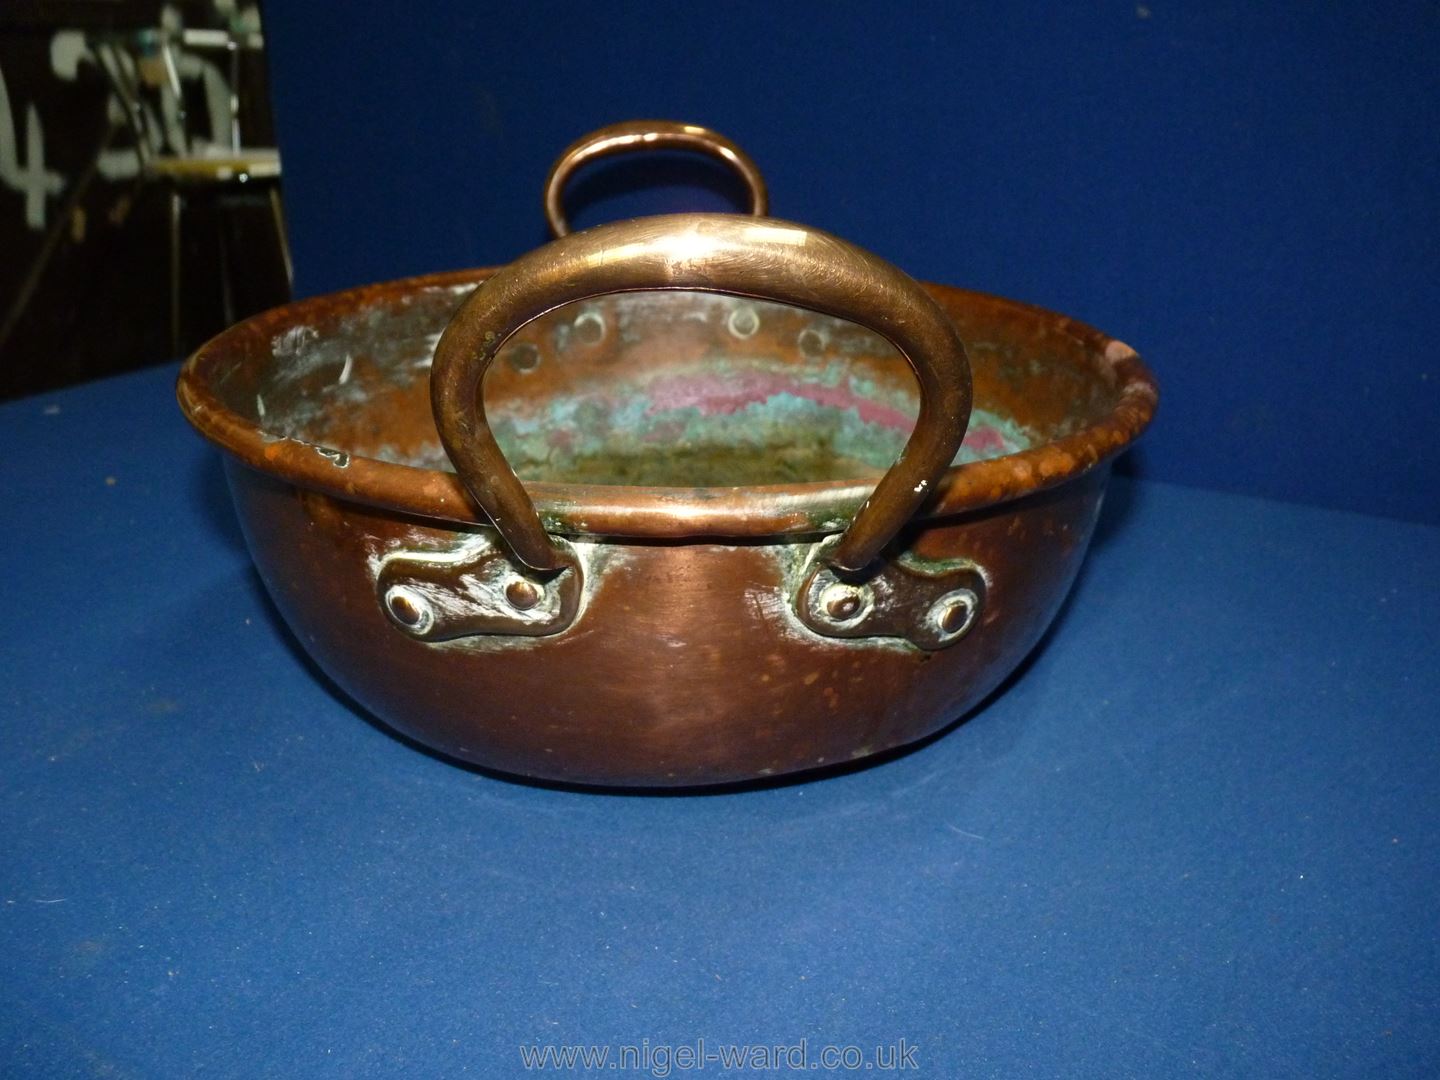 A shallow two handled copper pan, 4 1/2" deep x 11 3/4" diameter. - Image 5 of 6